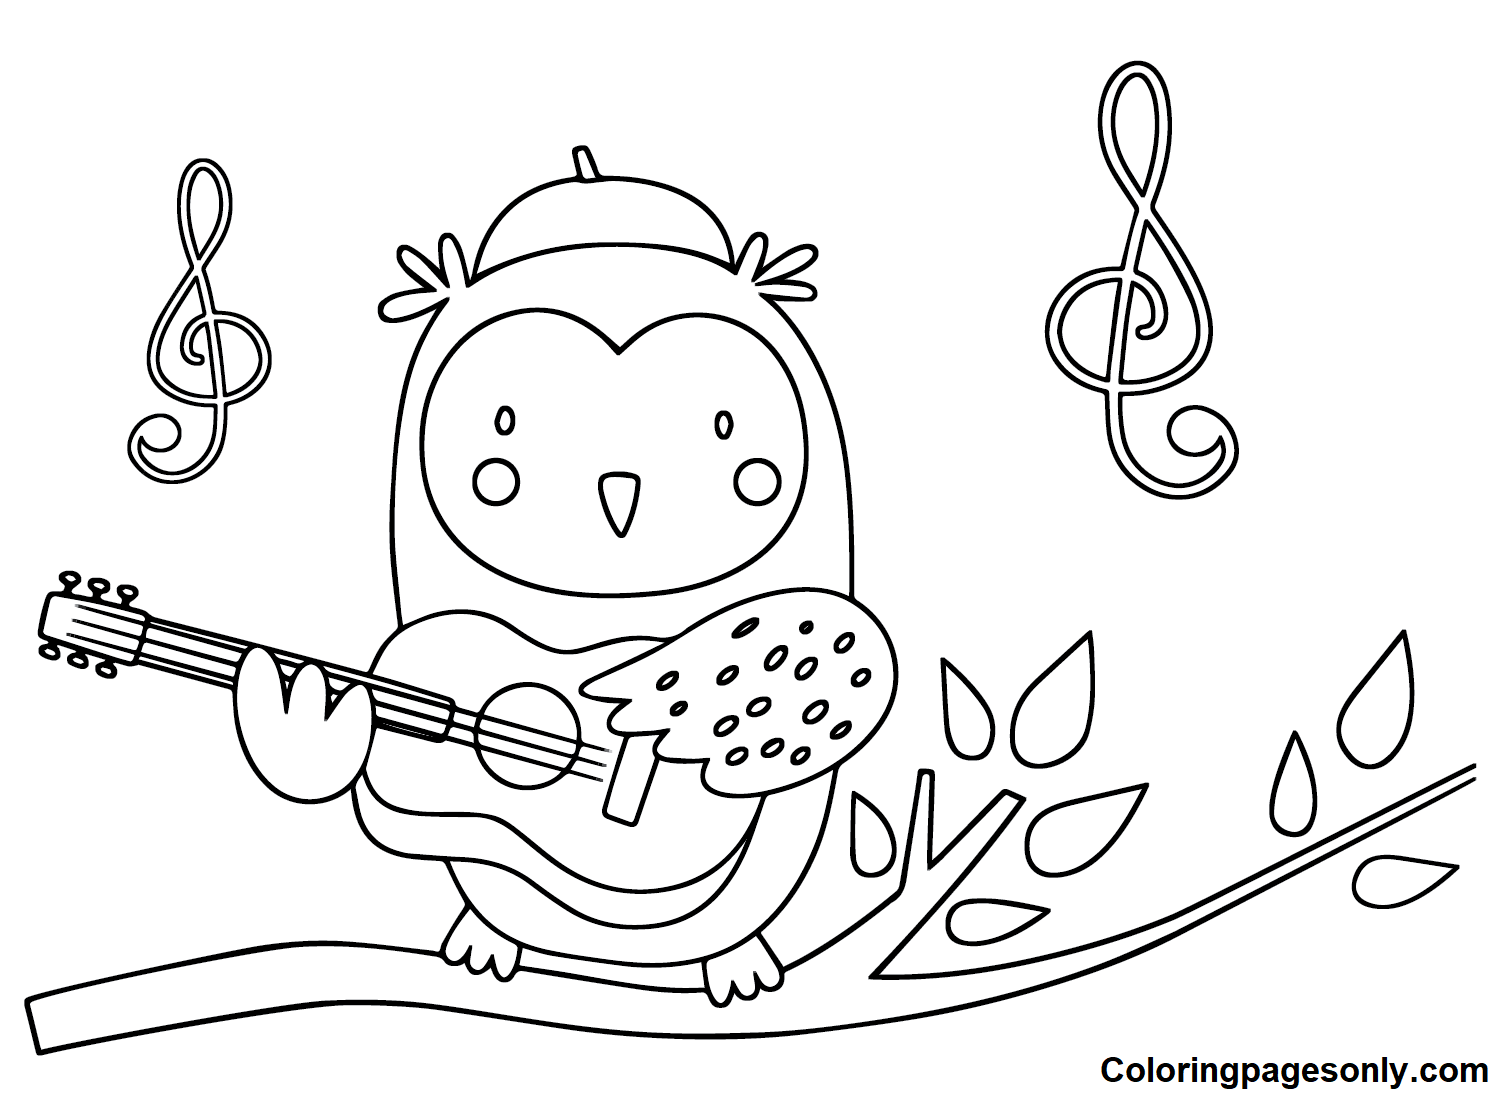 Bird playing Guitar Coloring Page